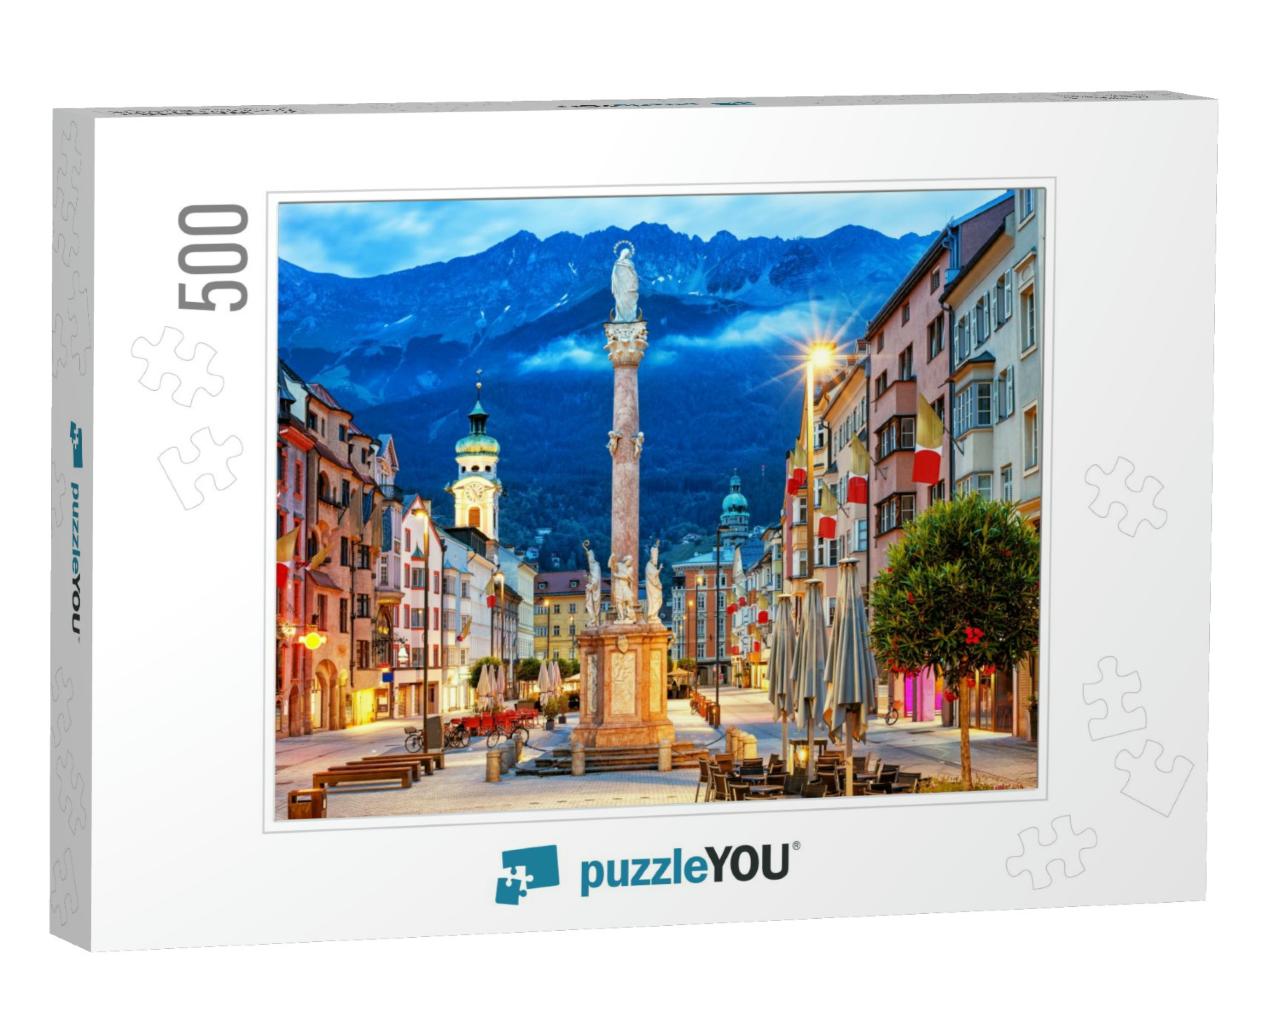 Innsbruck Old Town in Alps Mountains, Tyrol, Austria... Jigsaw Puzzle with 500 pieces